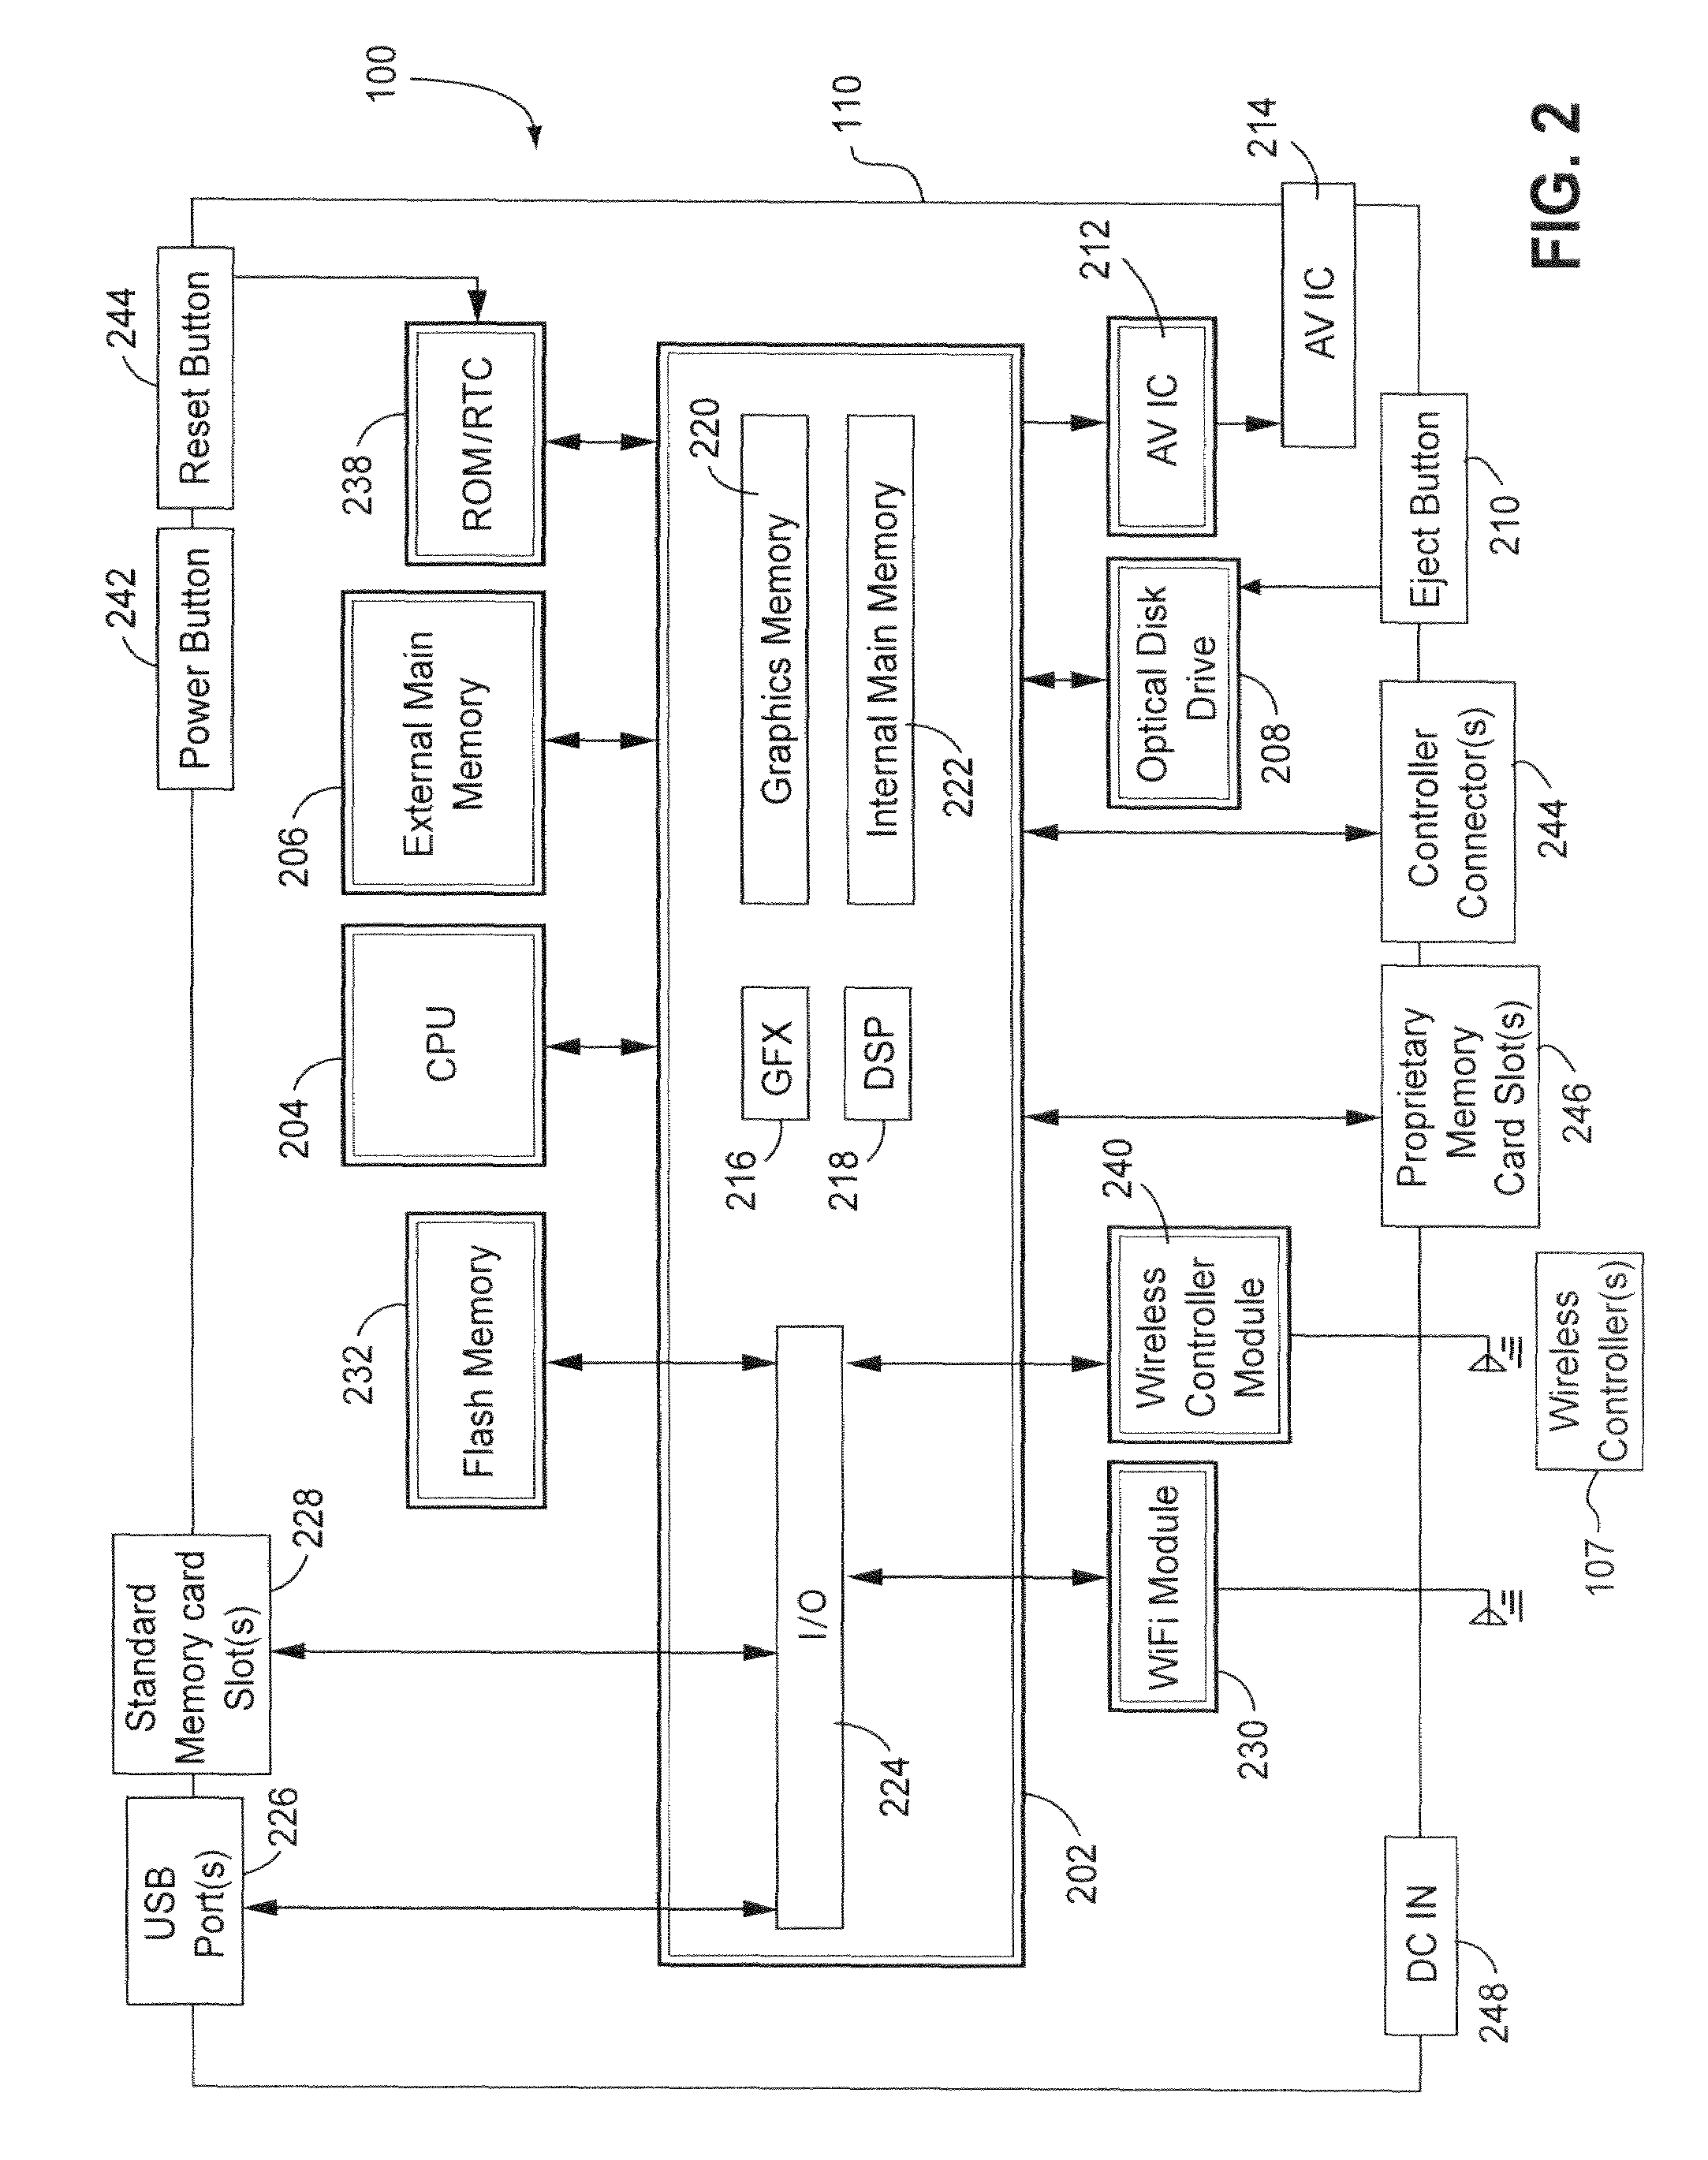 System and method for lock on target tracking with free targeting capability